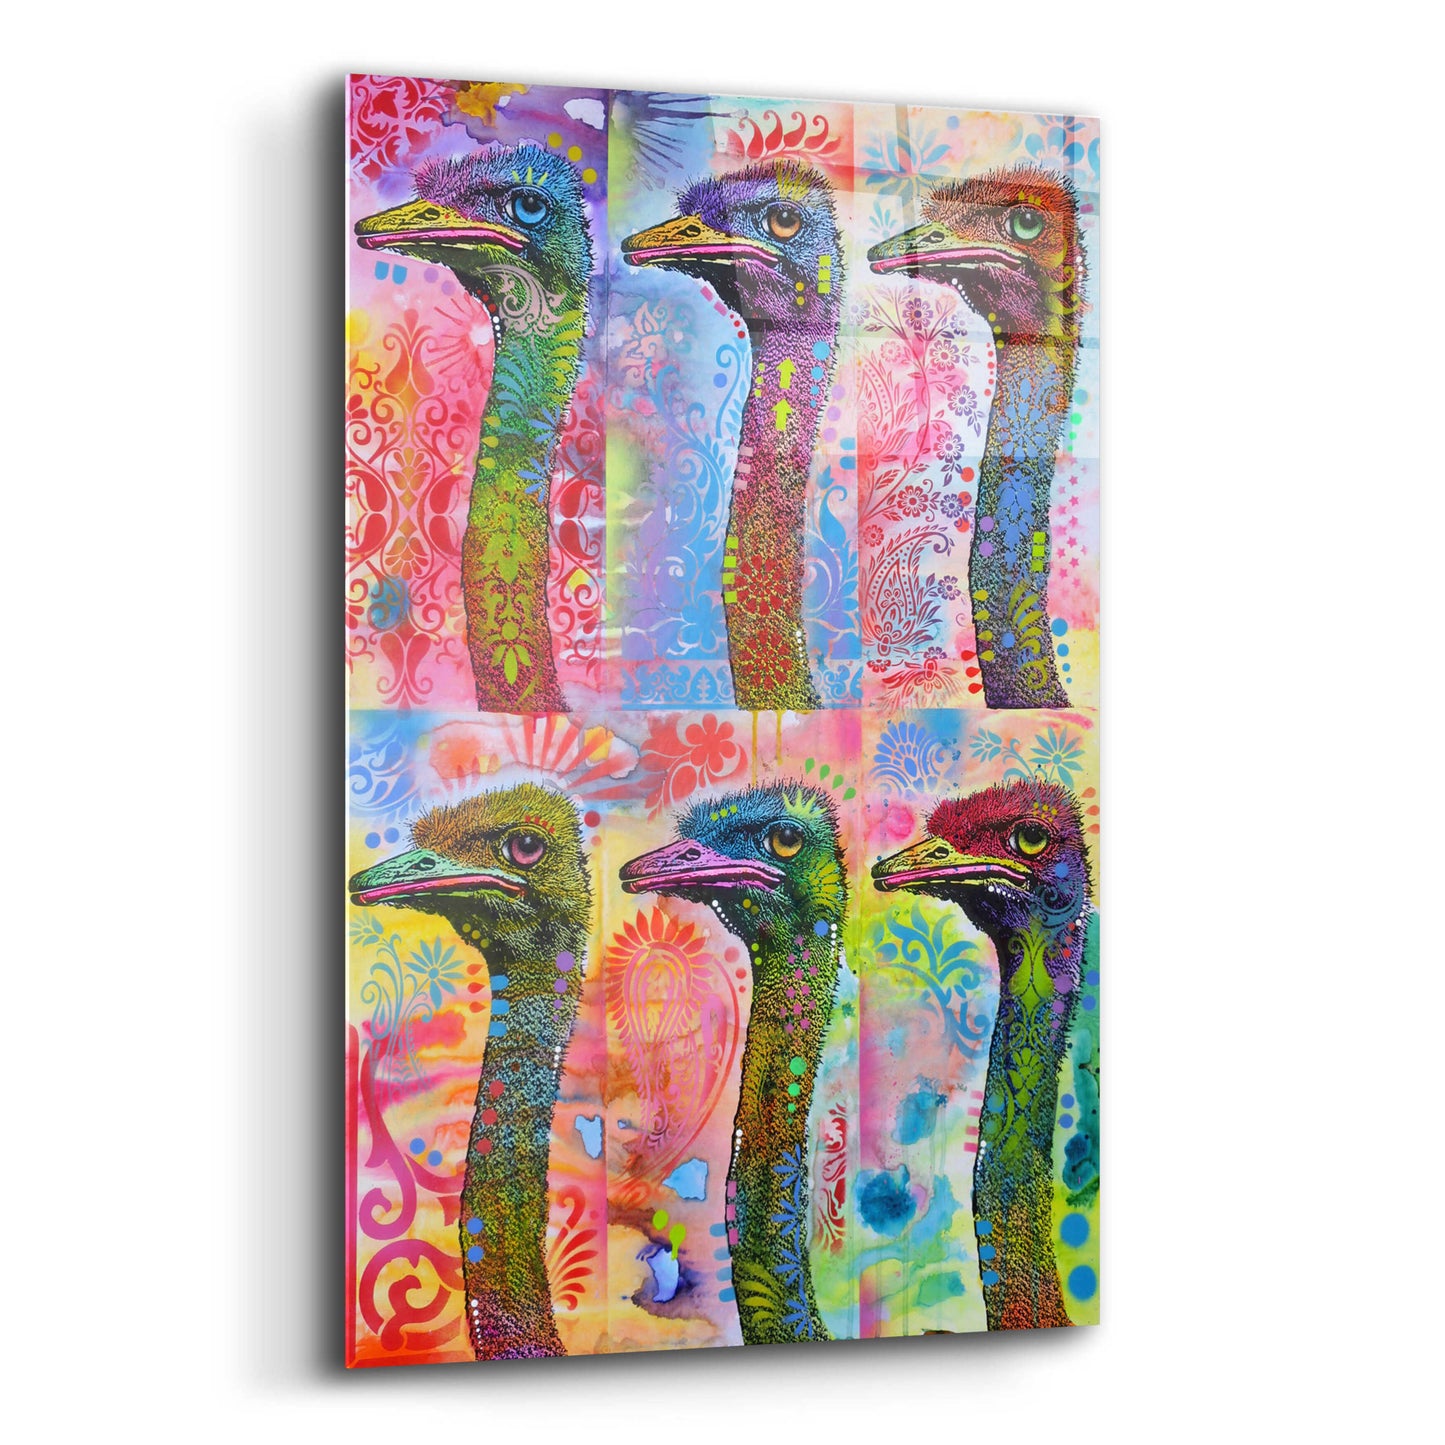 Epic Art '6 Ostriches' by Dean Russo, Acrylic Glass Wall Art,12x16